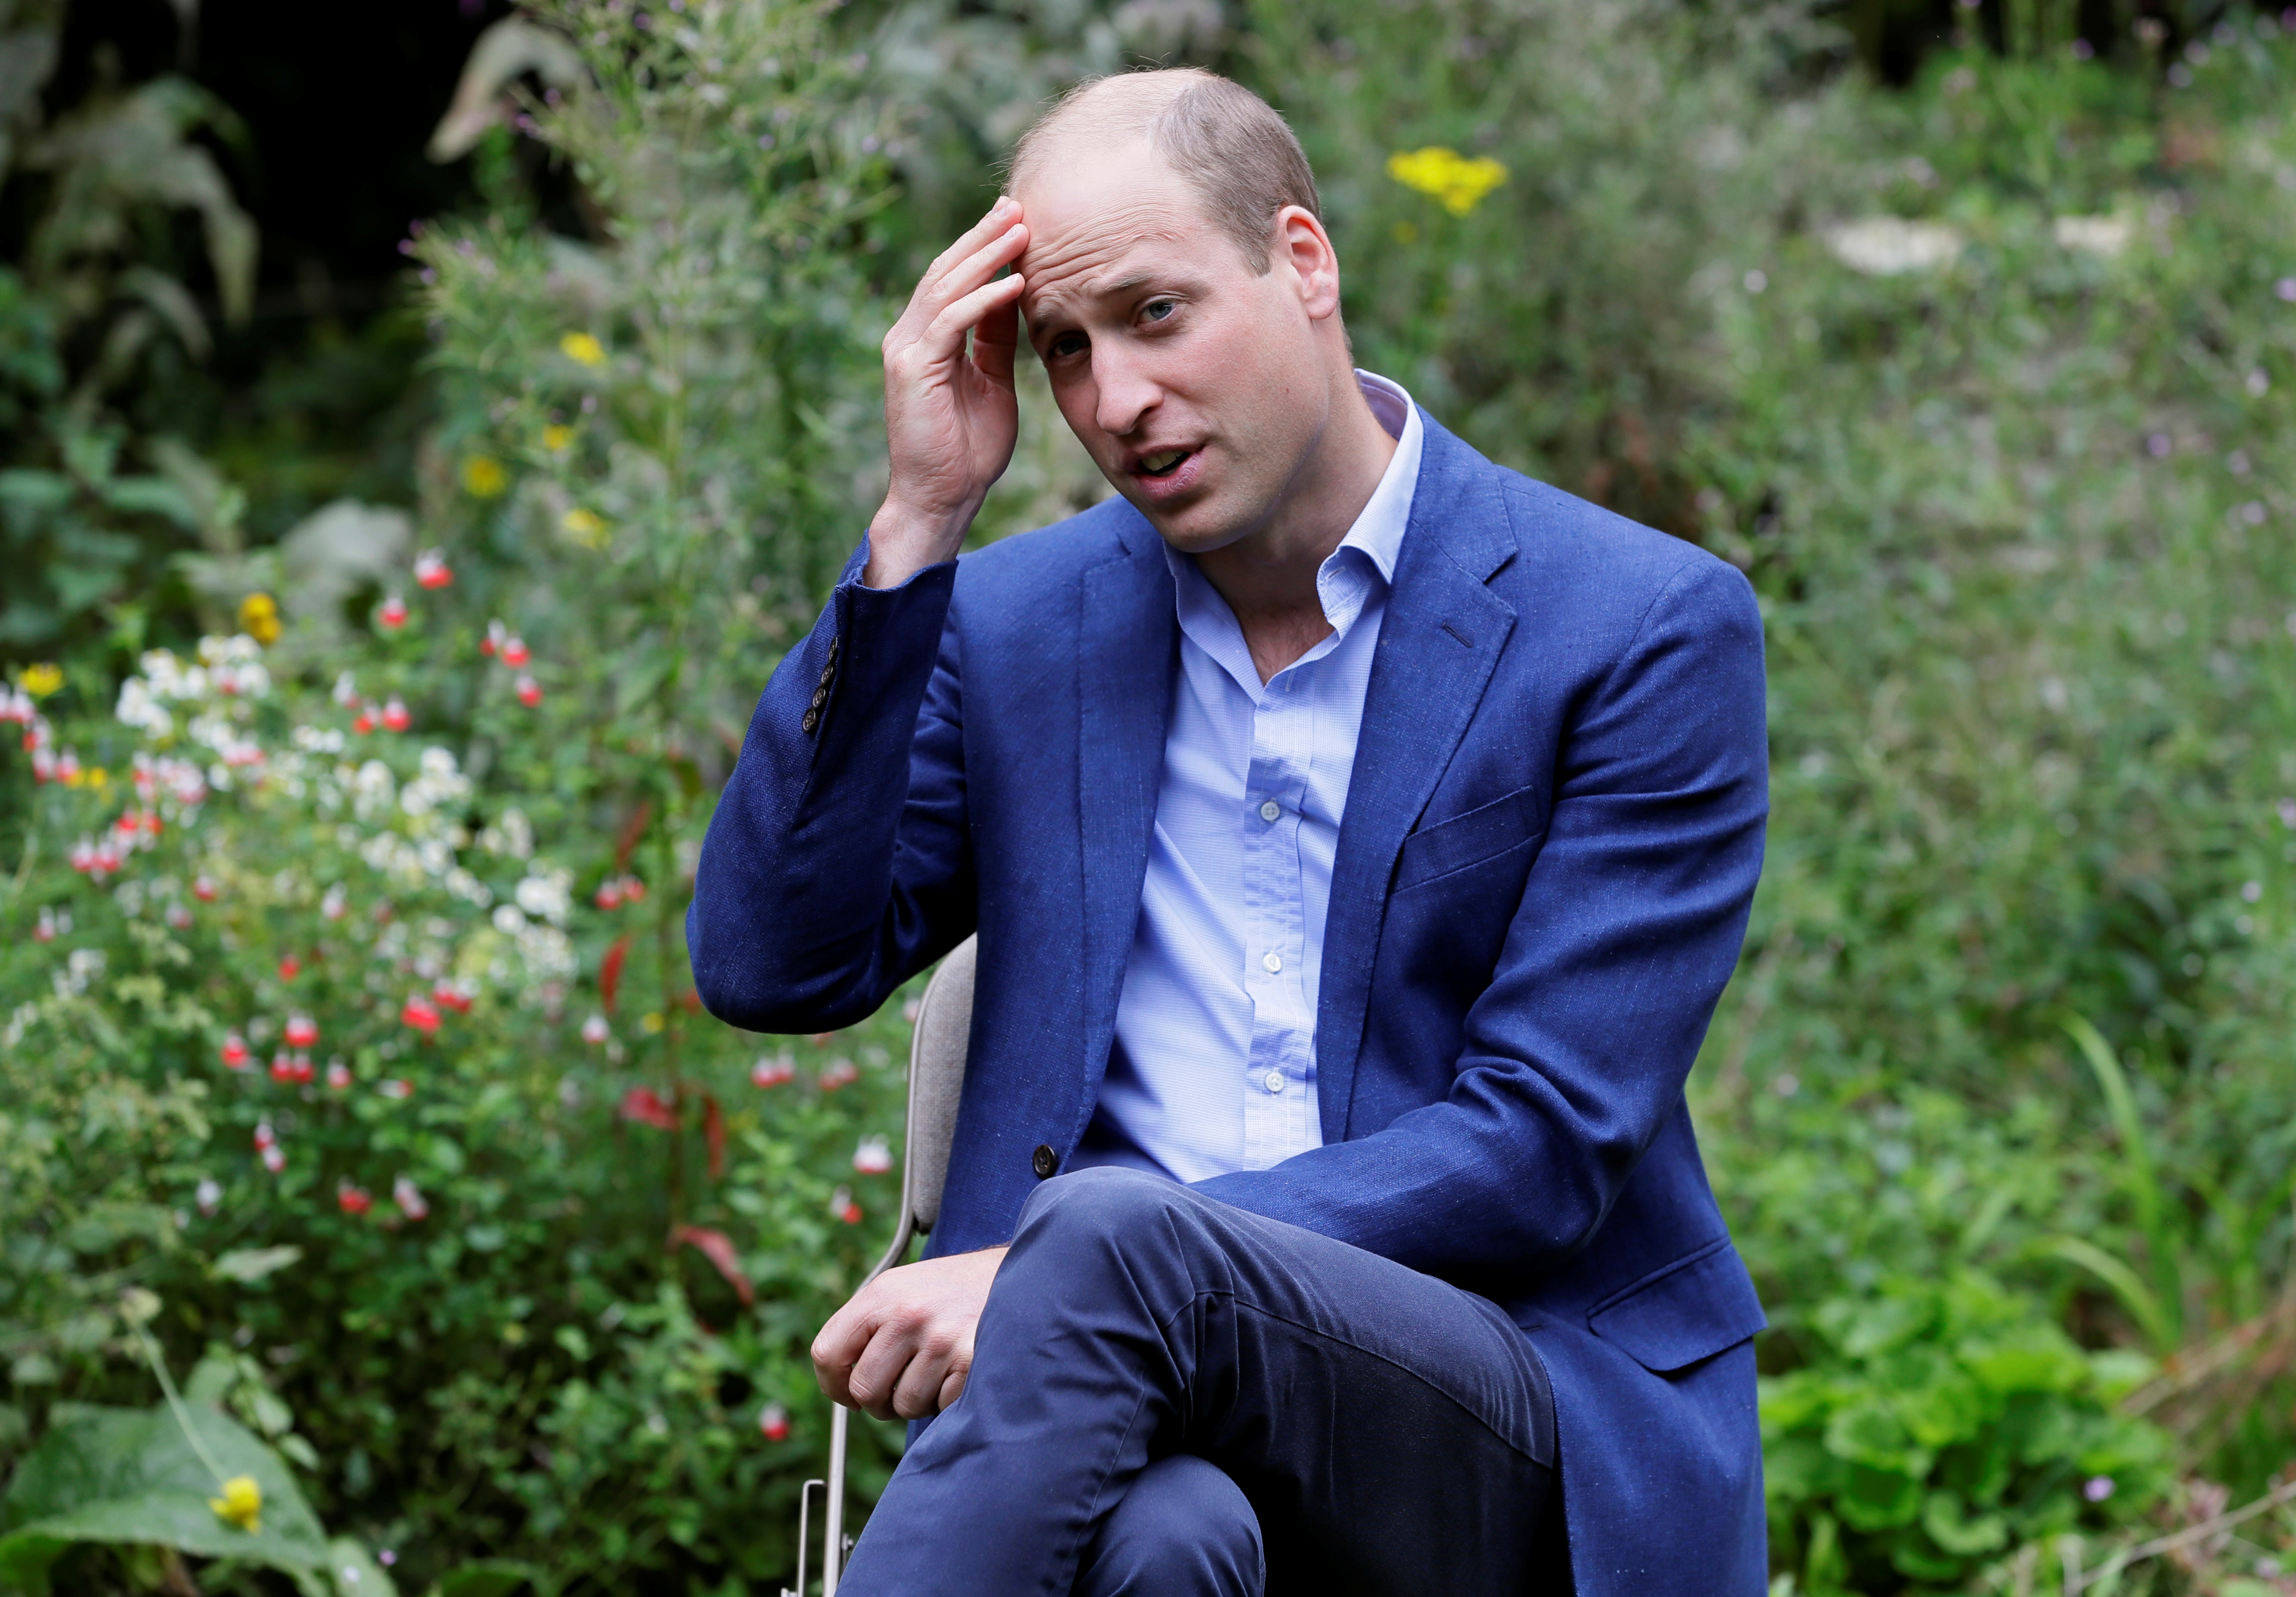 Britain's Prince William, Duke of Cambridge, speaks during a visit to the Garden House, part of the Light Project, which works on getting people safely off the streets throughout the coronavirus disease (COVID-19) outbreak, in Peterborough, Britain, July 16, 2020. Kirsty Wigglesworth/Pool via REUTERS